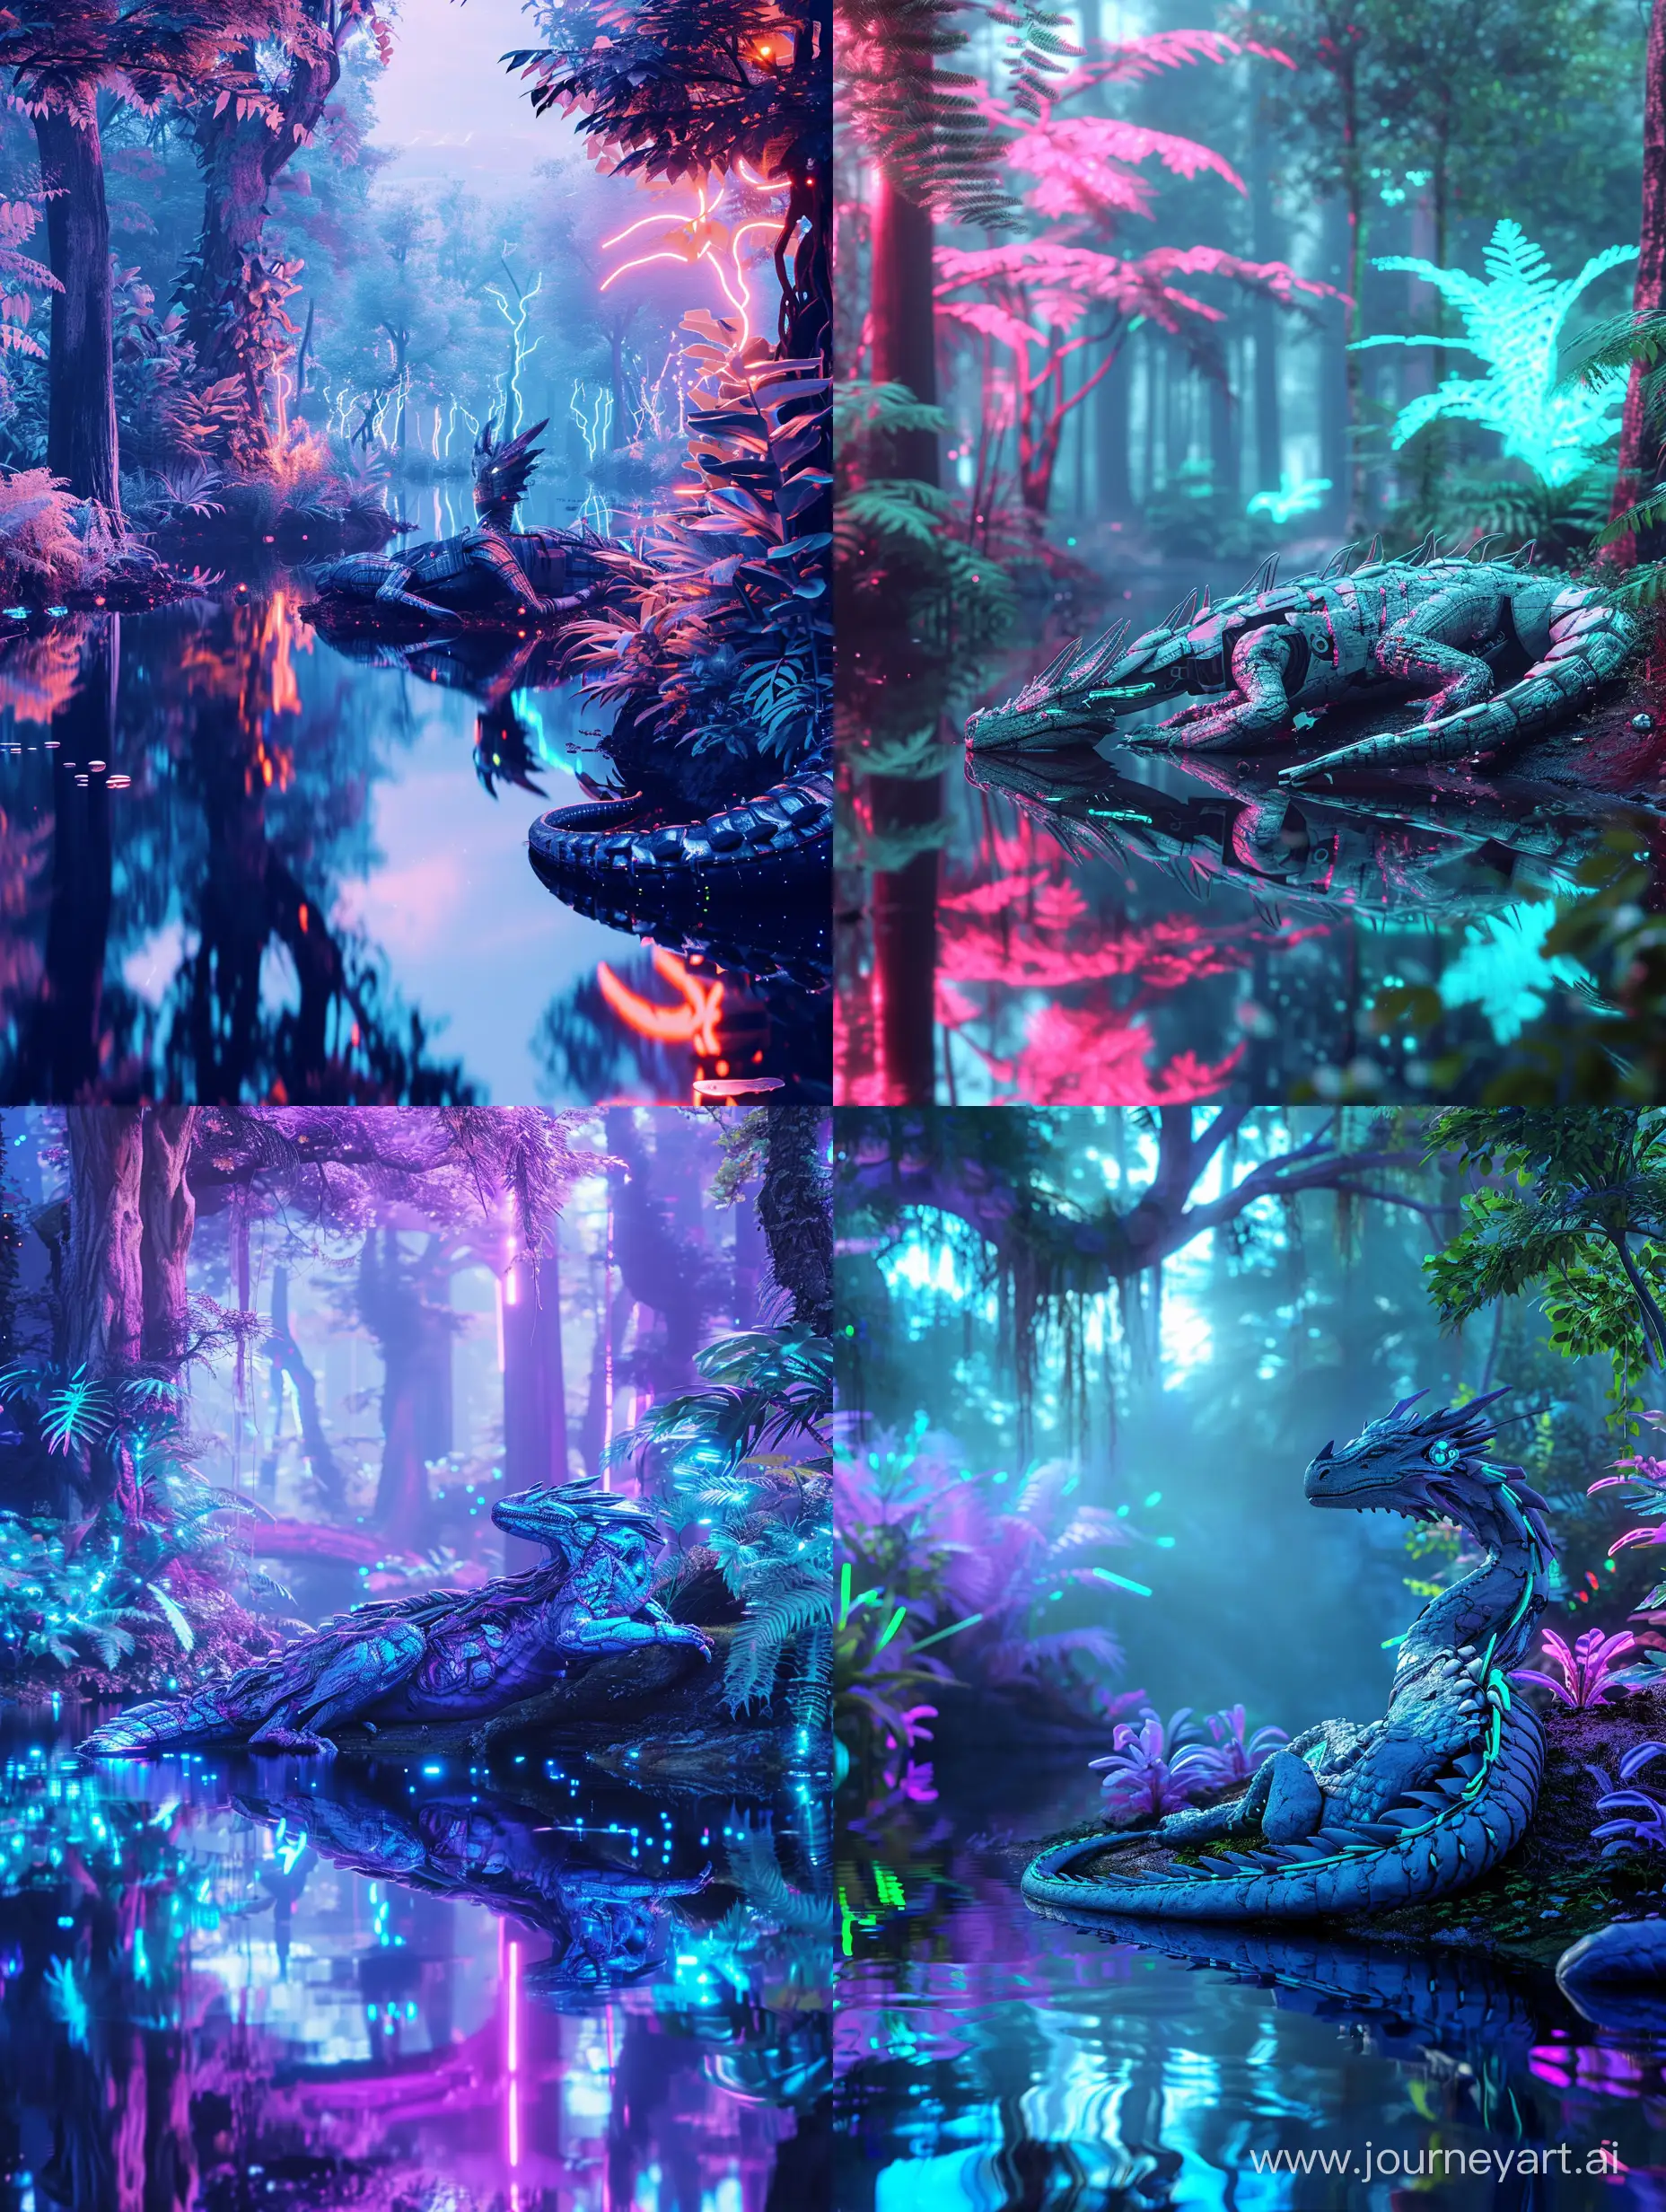 A serene moment capturing a cyborg dragon resting by a reflective lake in a neon forest. The environment is a surreal blend of nature and technology, with bioluminescent plants and digital fauna. Created Using: surreal art, neon colors, reflective water effects, tranquil pose, digital nature, bioluminescence, synthetic biology, peaceful ambiance, X prompt, hd quality, natural look --ar 3:4 --v 6.0